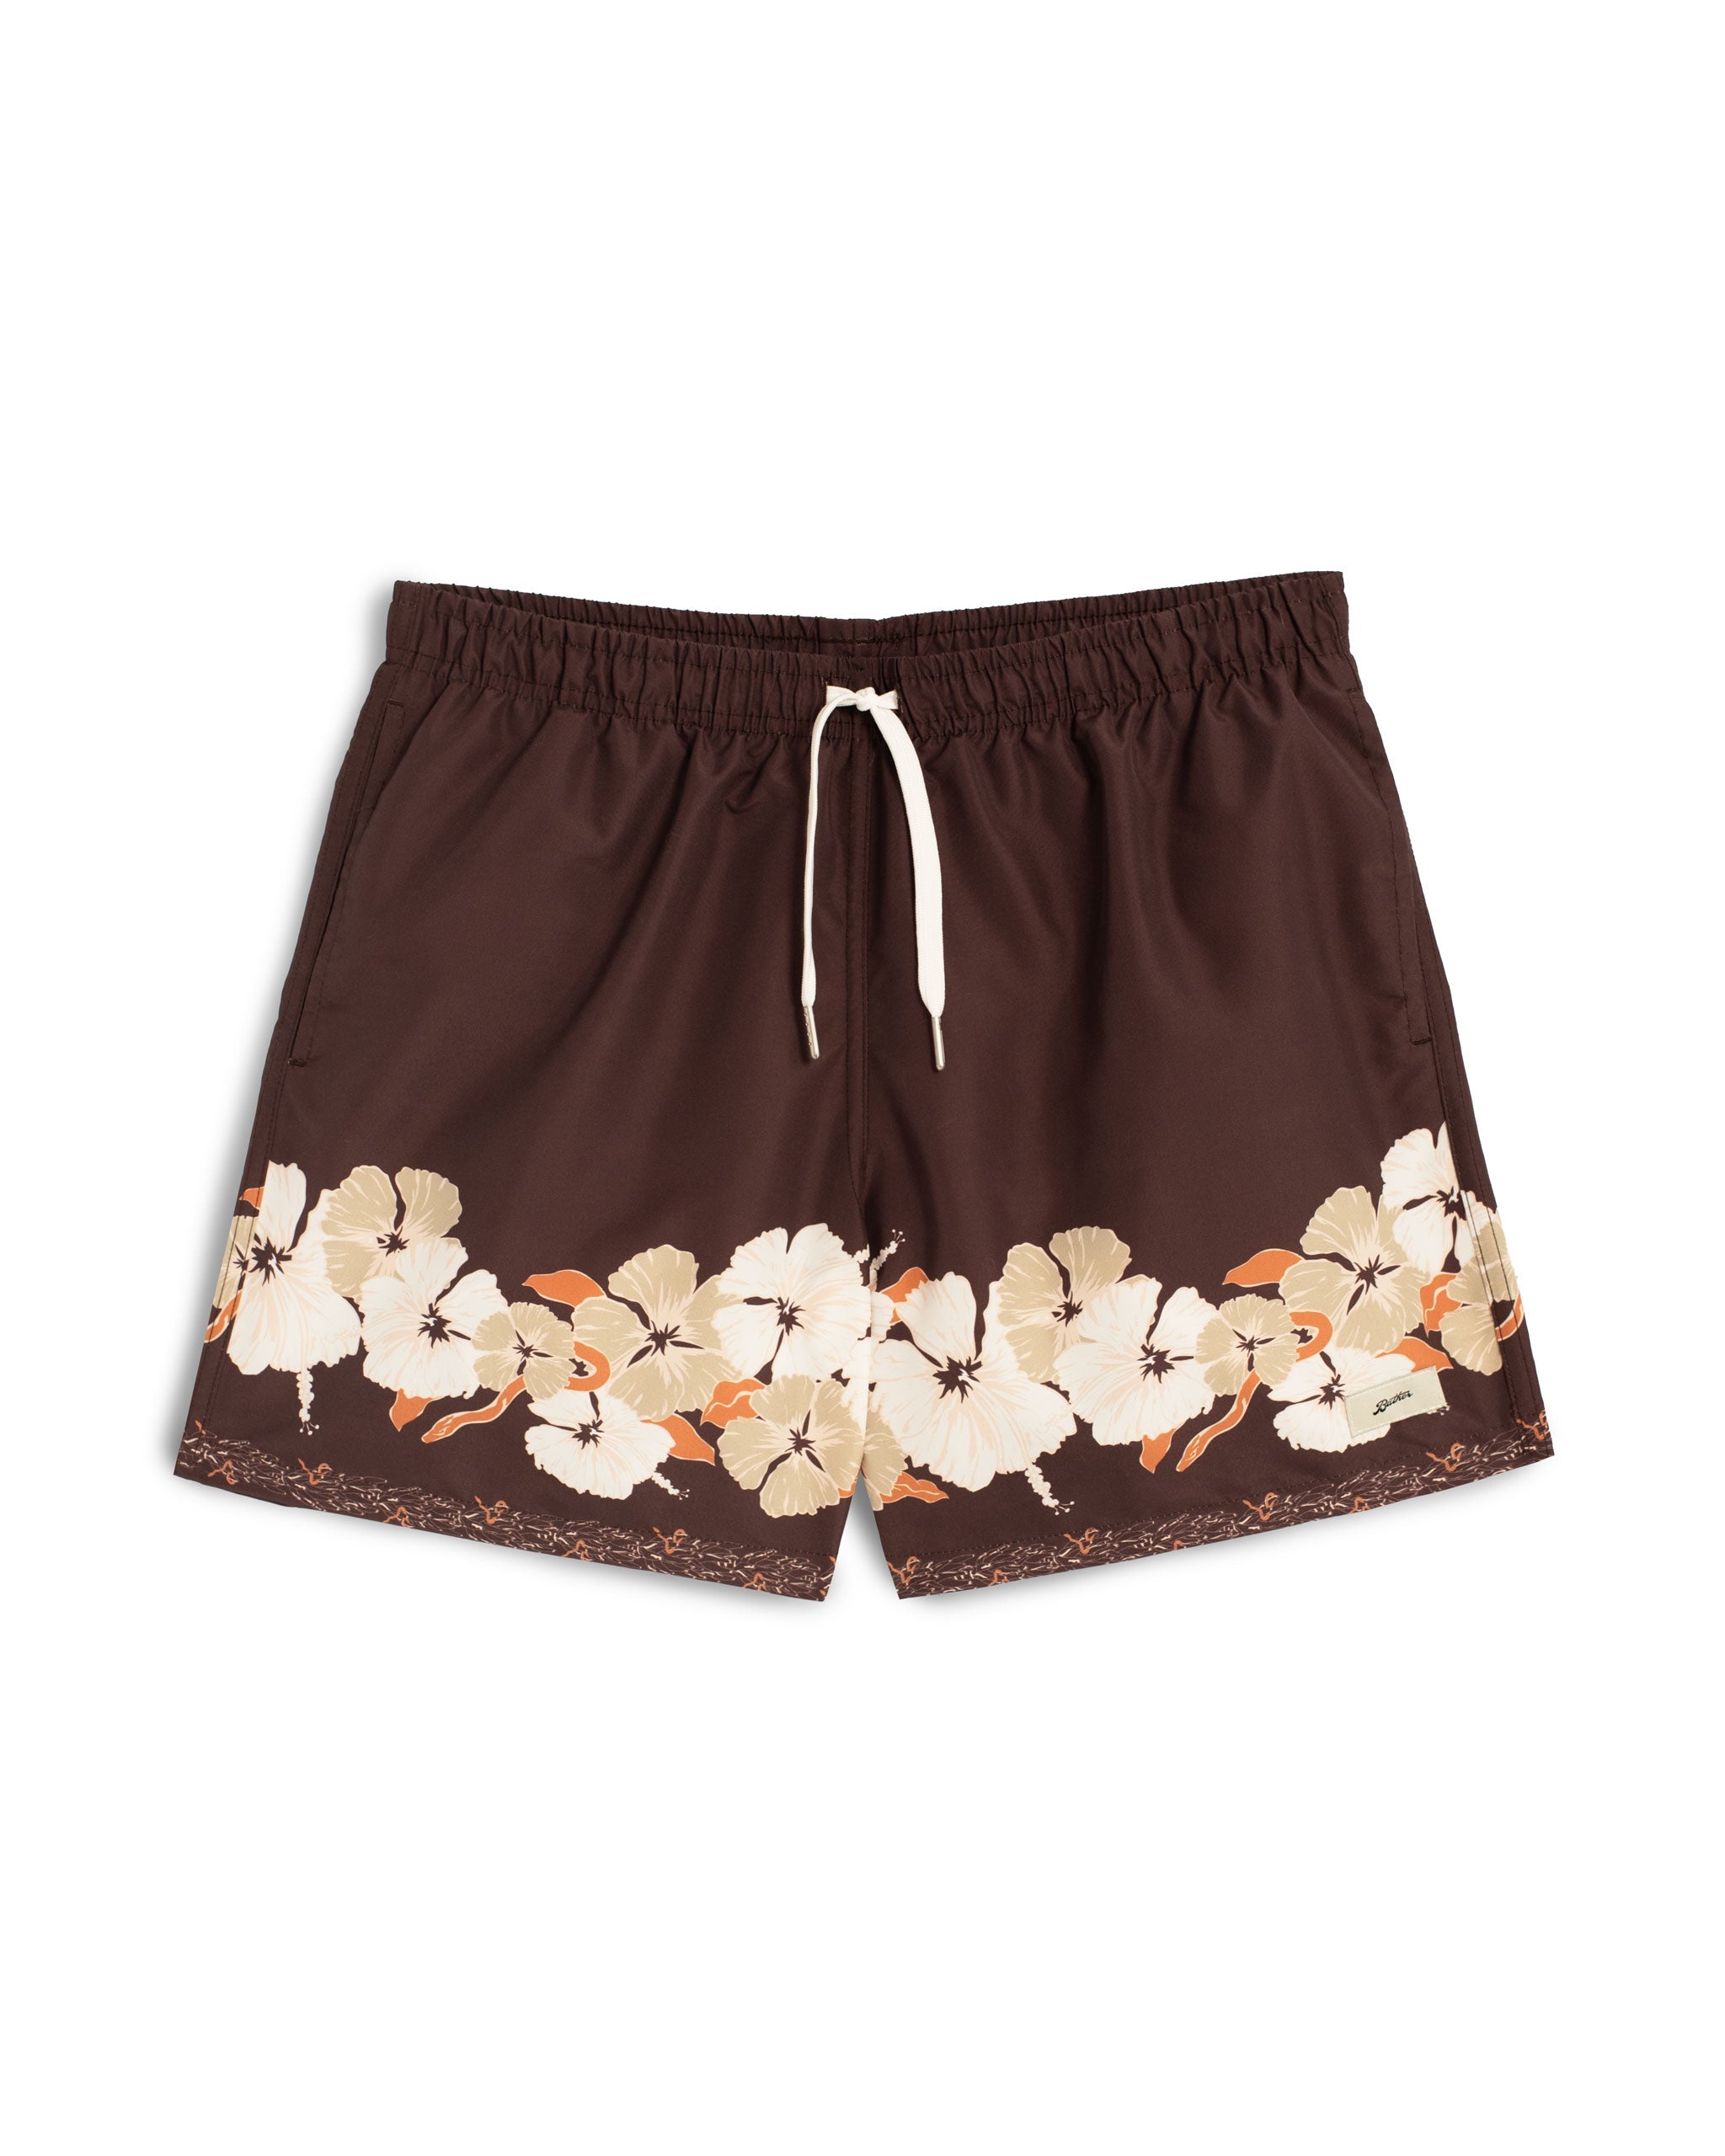 Brown swim trunk with floral print on the bottom of the leg